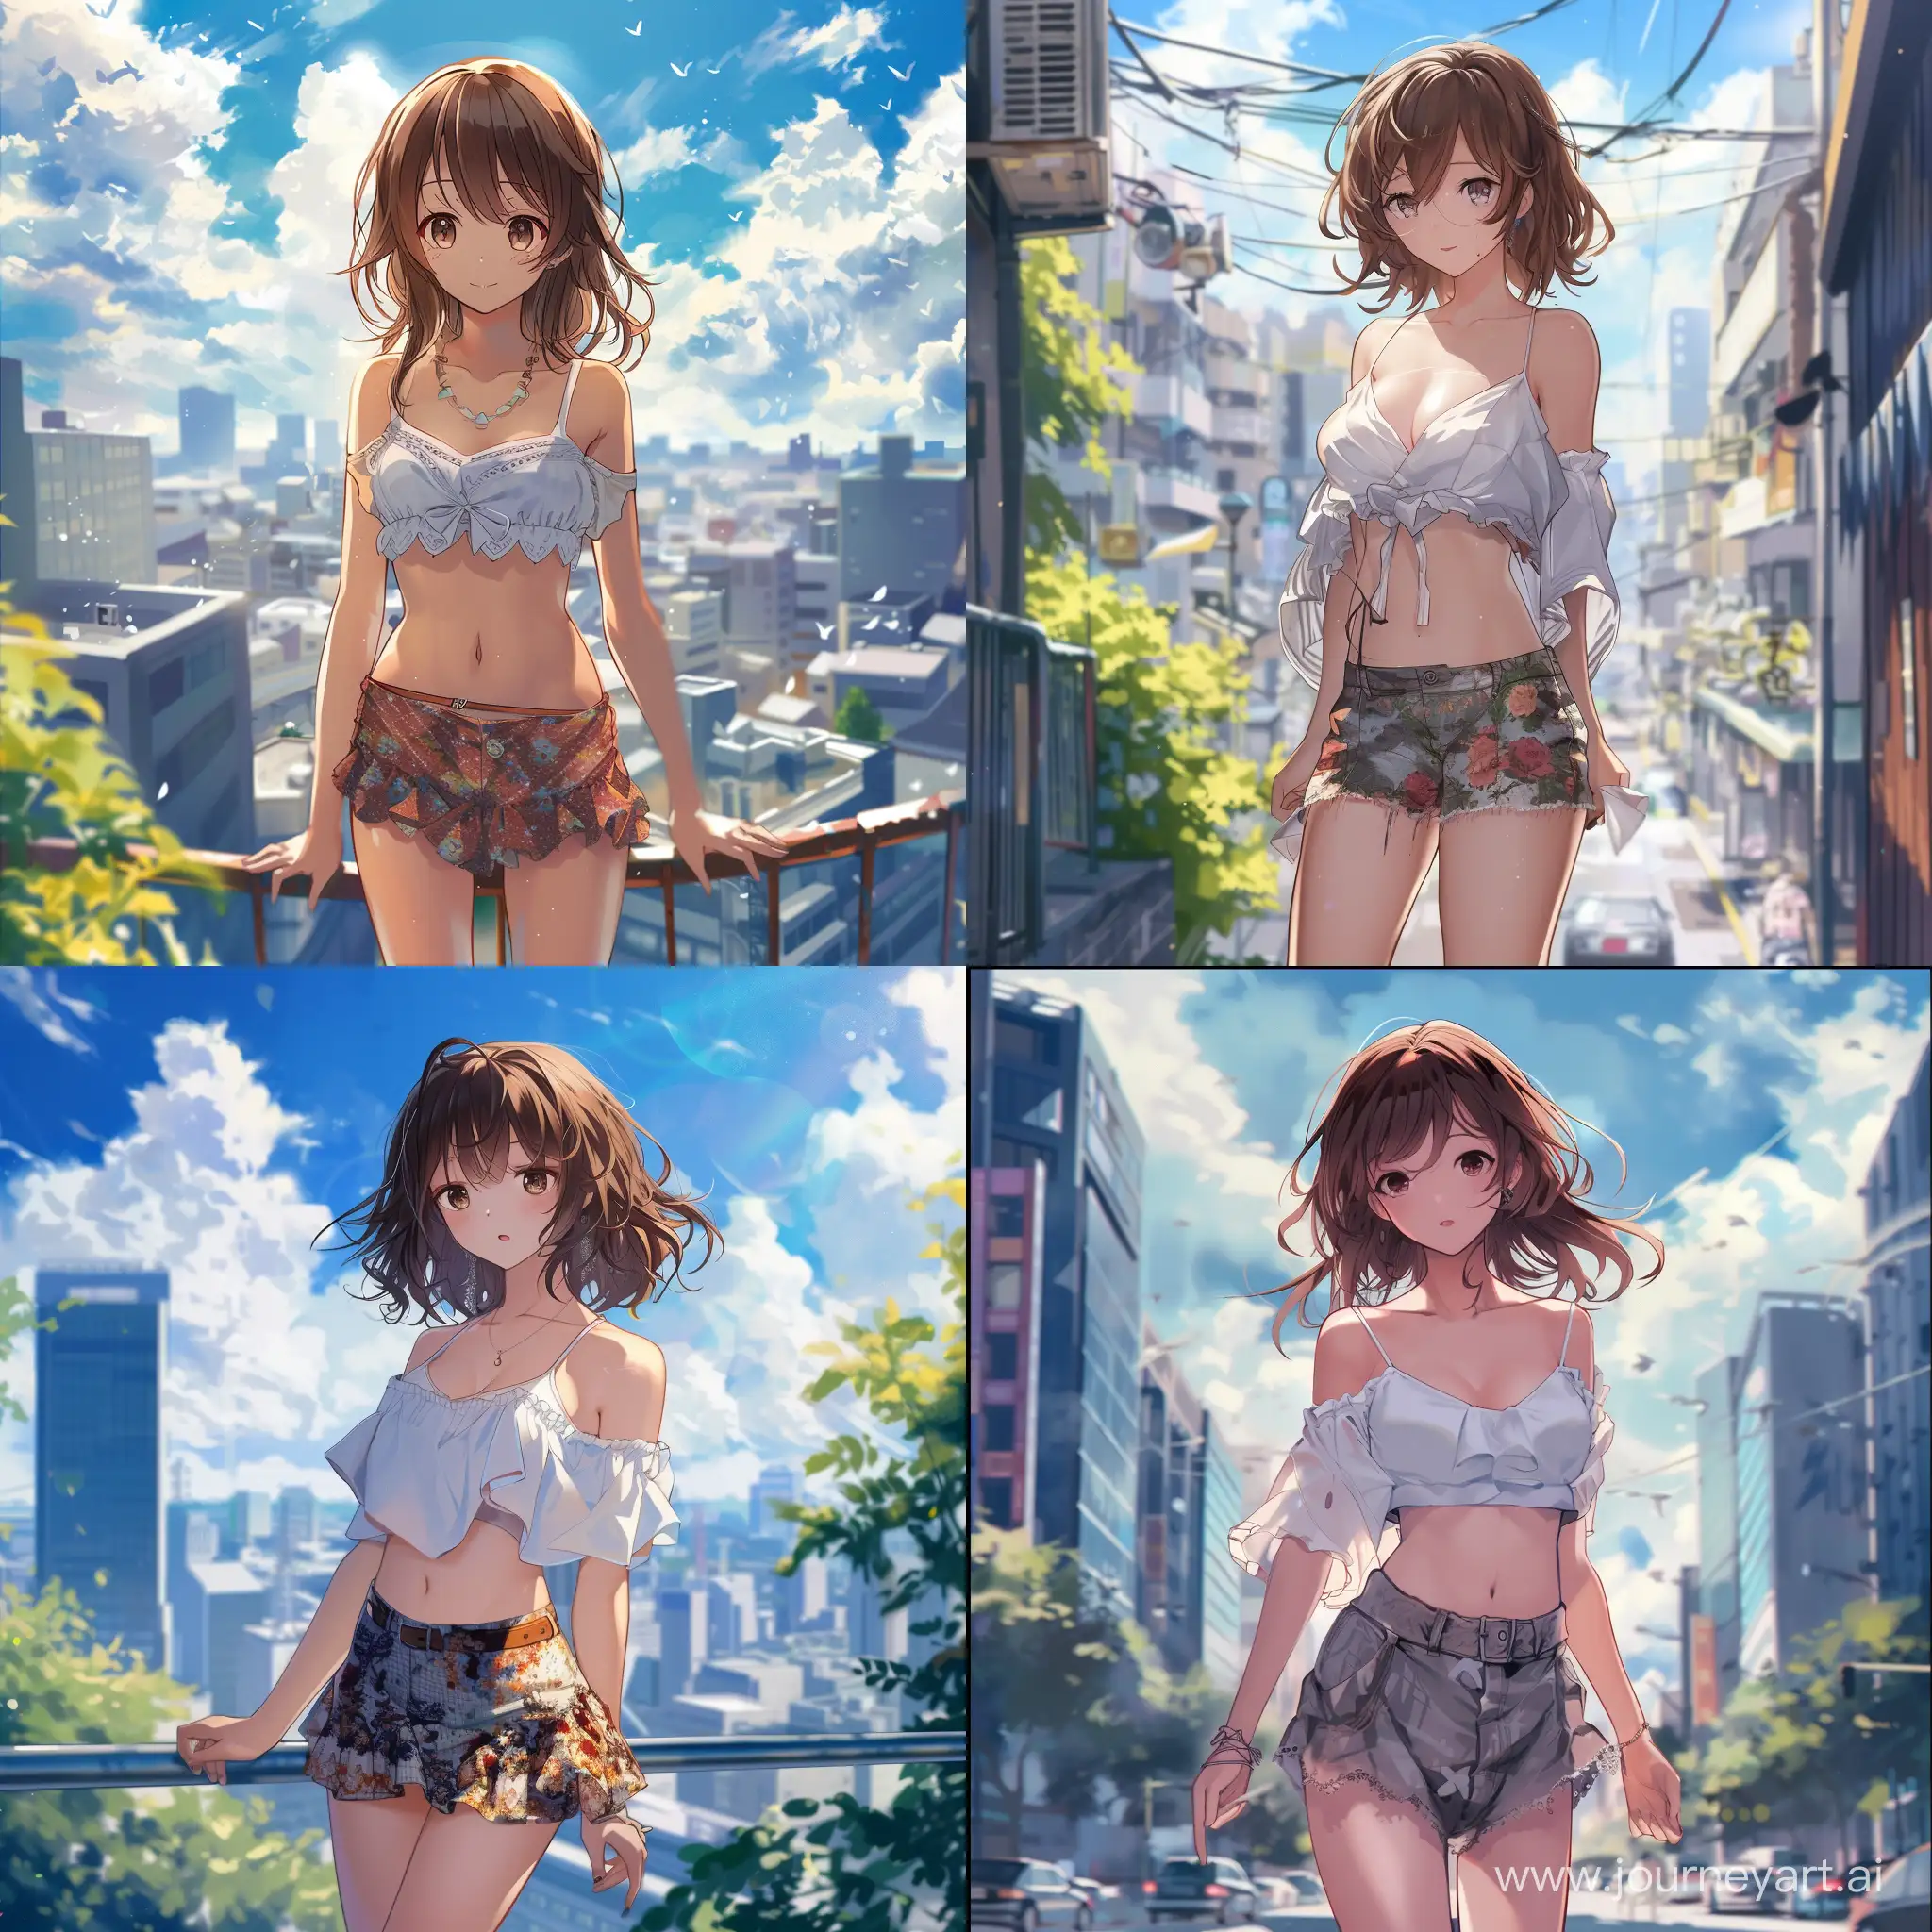 anime characters girl with brown hair . city . cute clothes. short skirt. white top.